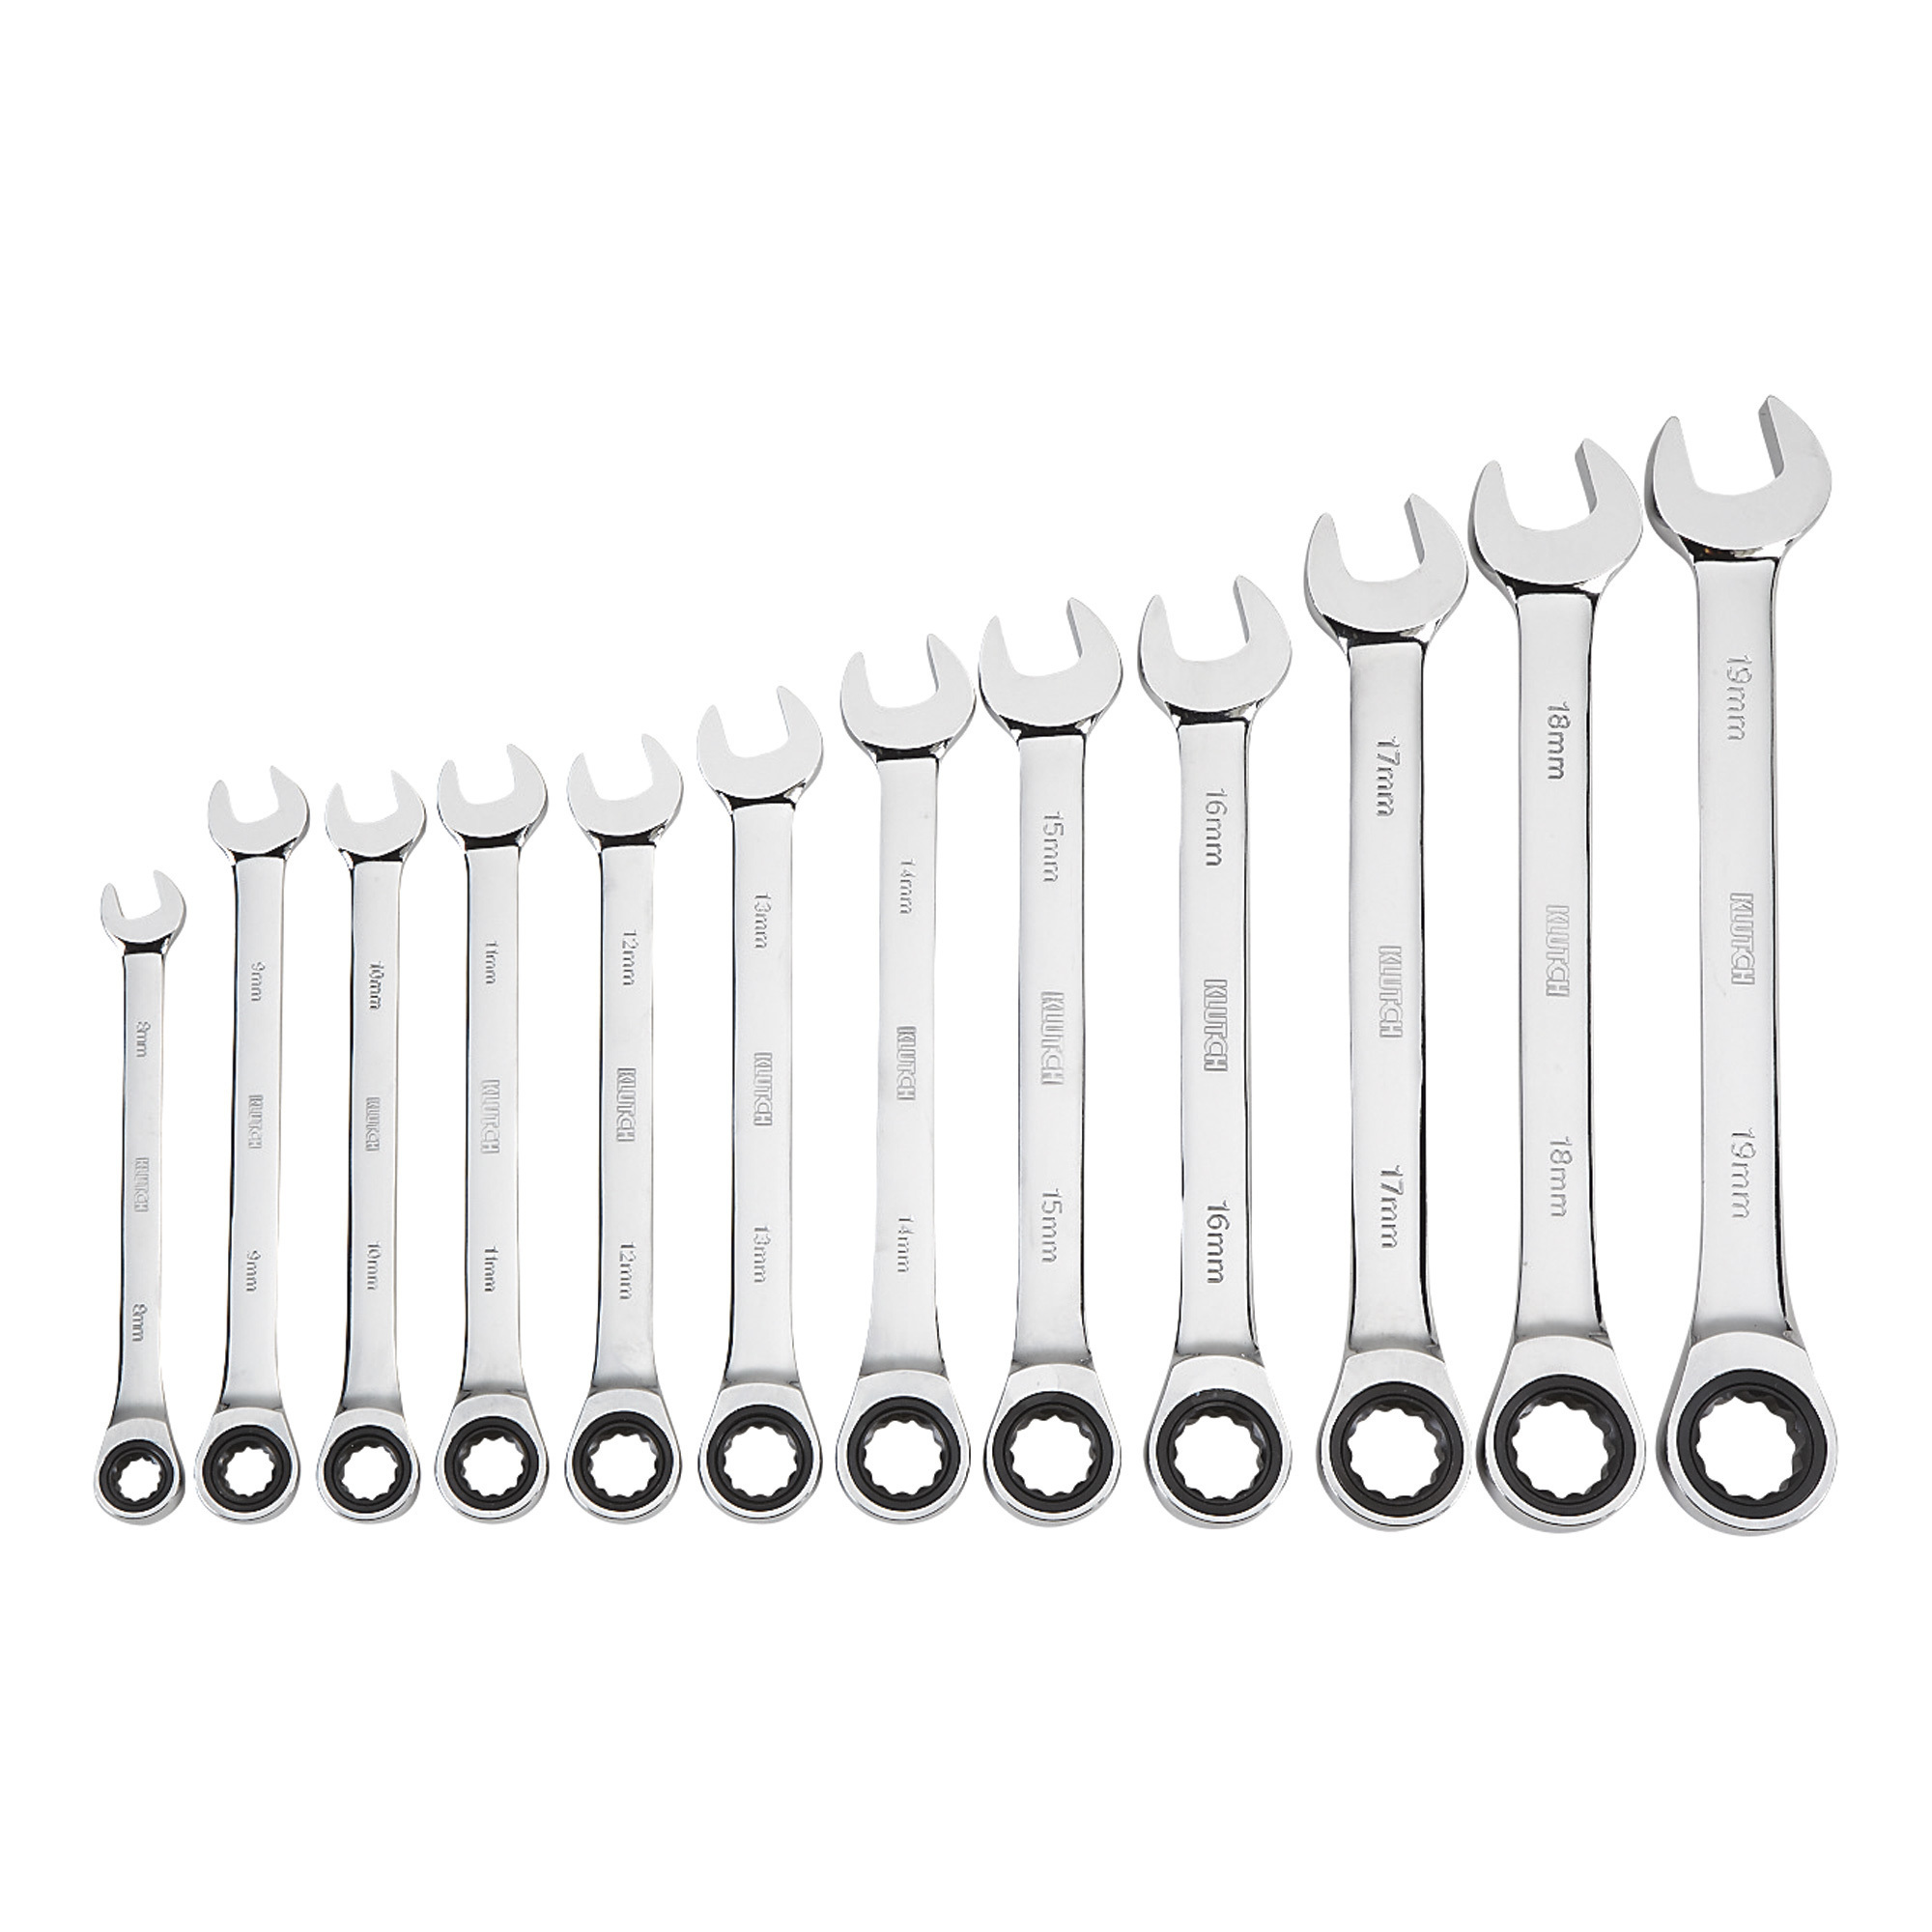 Klutch Ratcheting Wrench Set, 12-Piece, Metric: 8-19mm